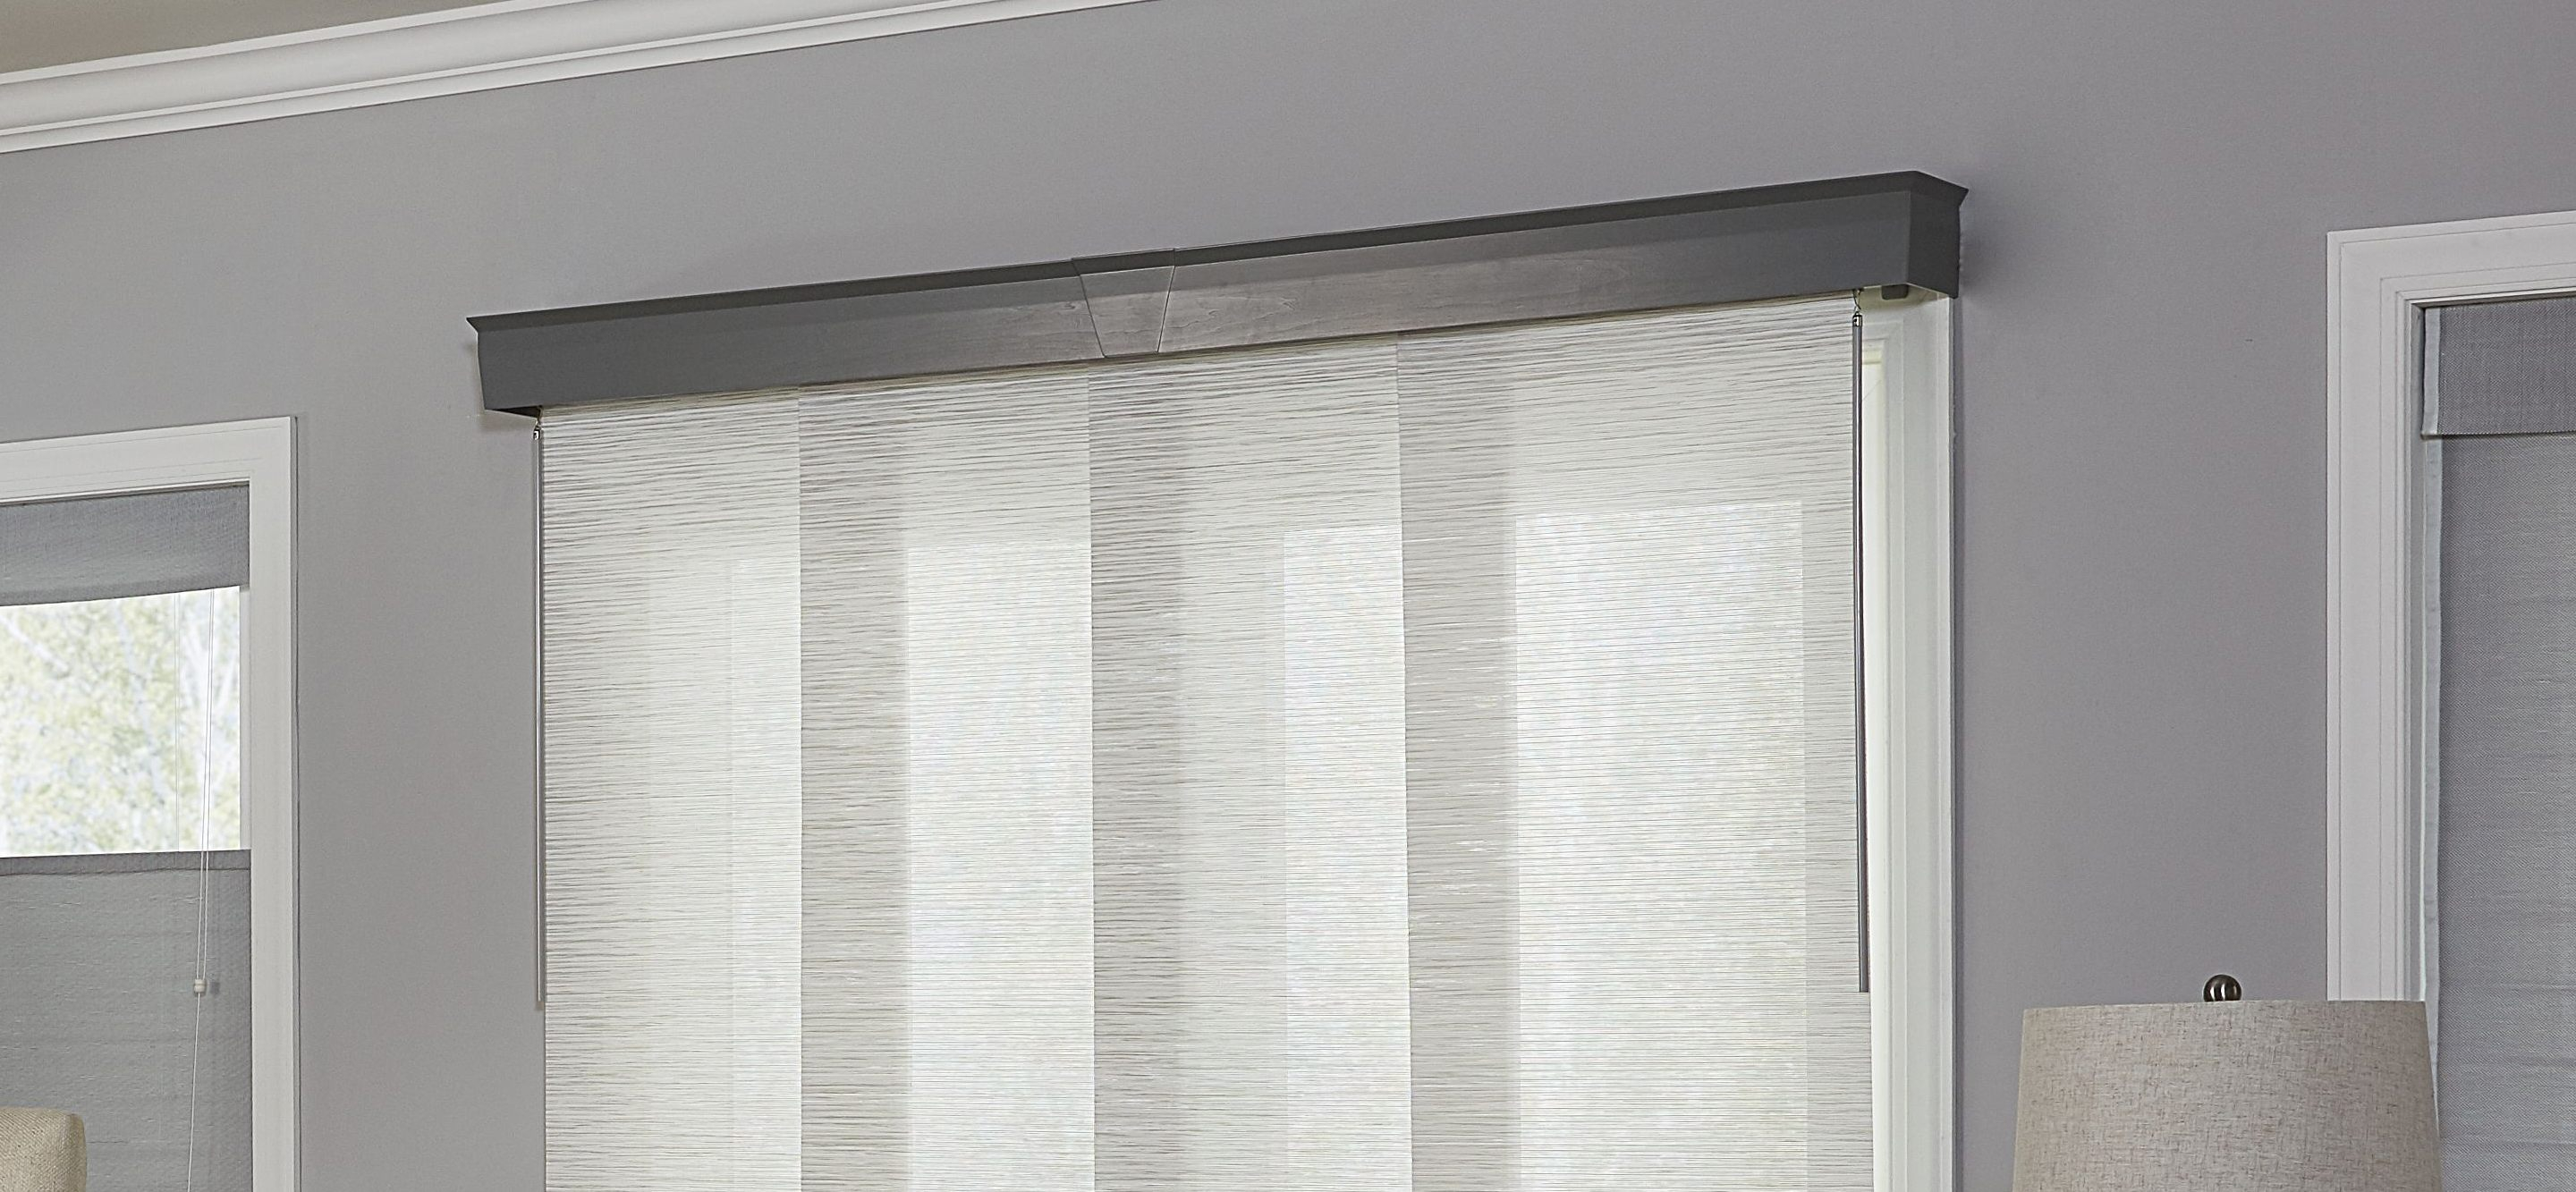 The Best Vertical Blinds Alternatives For Sliding Glass Doors with proportions 2880 X 1333